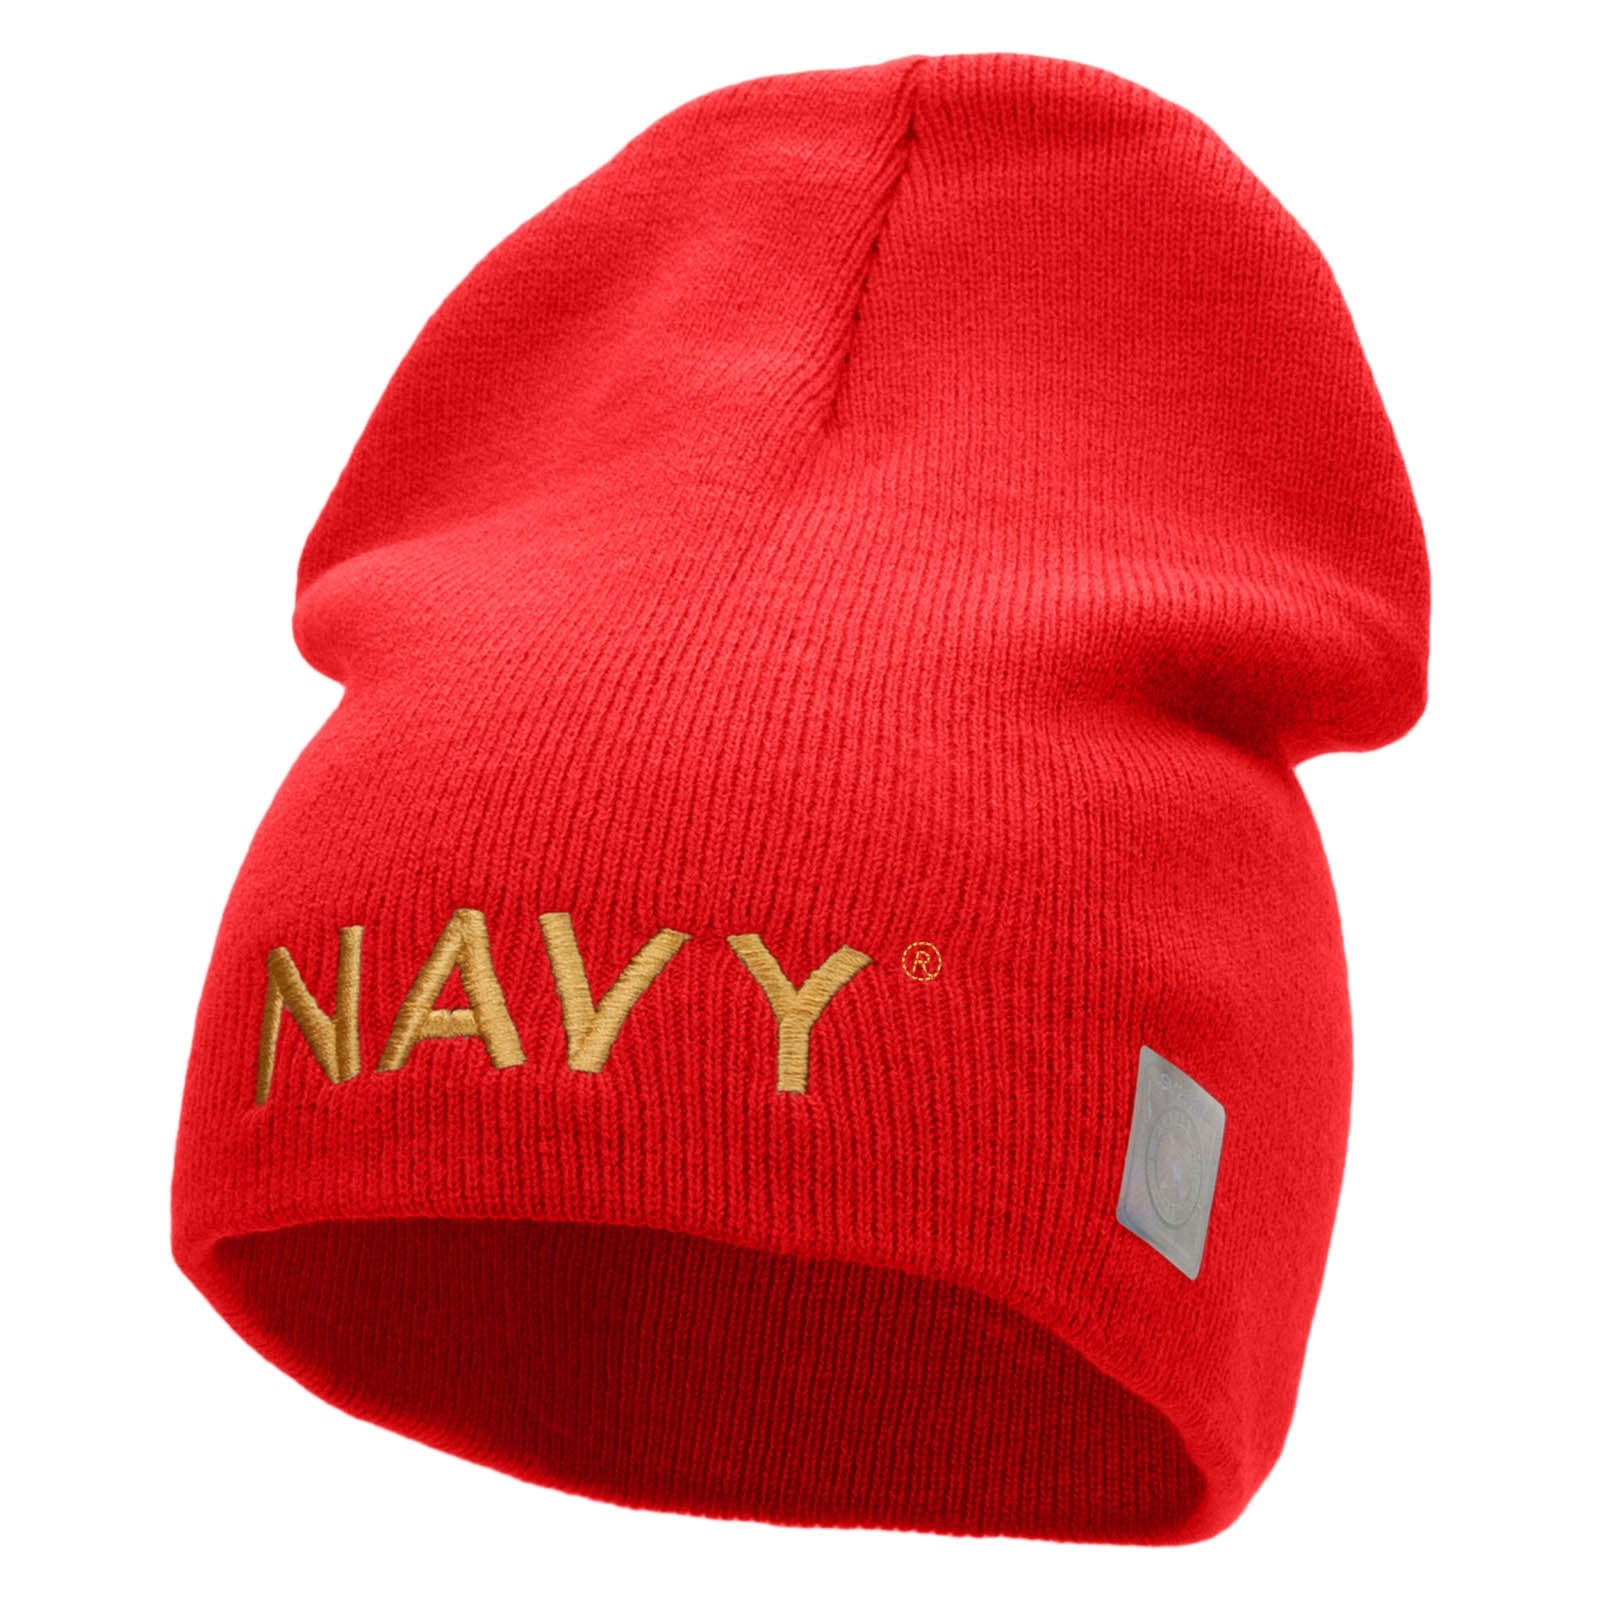 Licensed Navy Military Embroidered Short Beanie Made in USA - Red OSFM